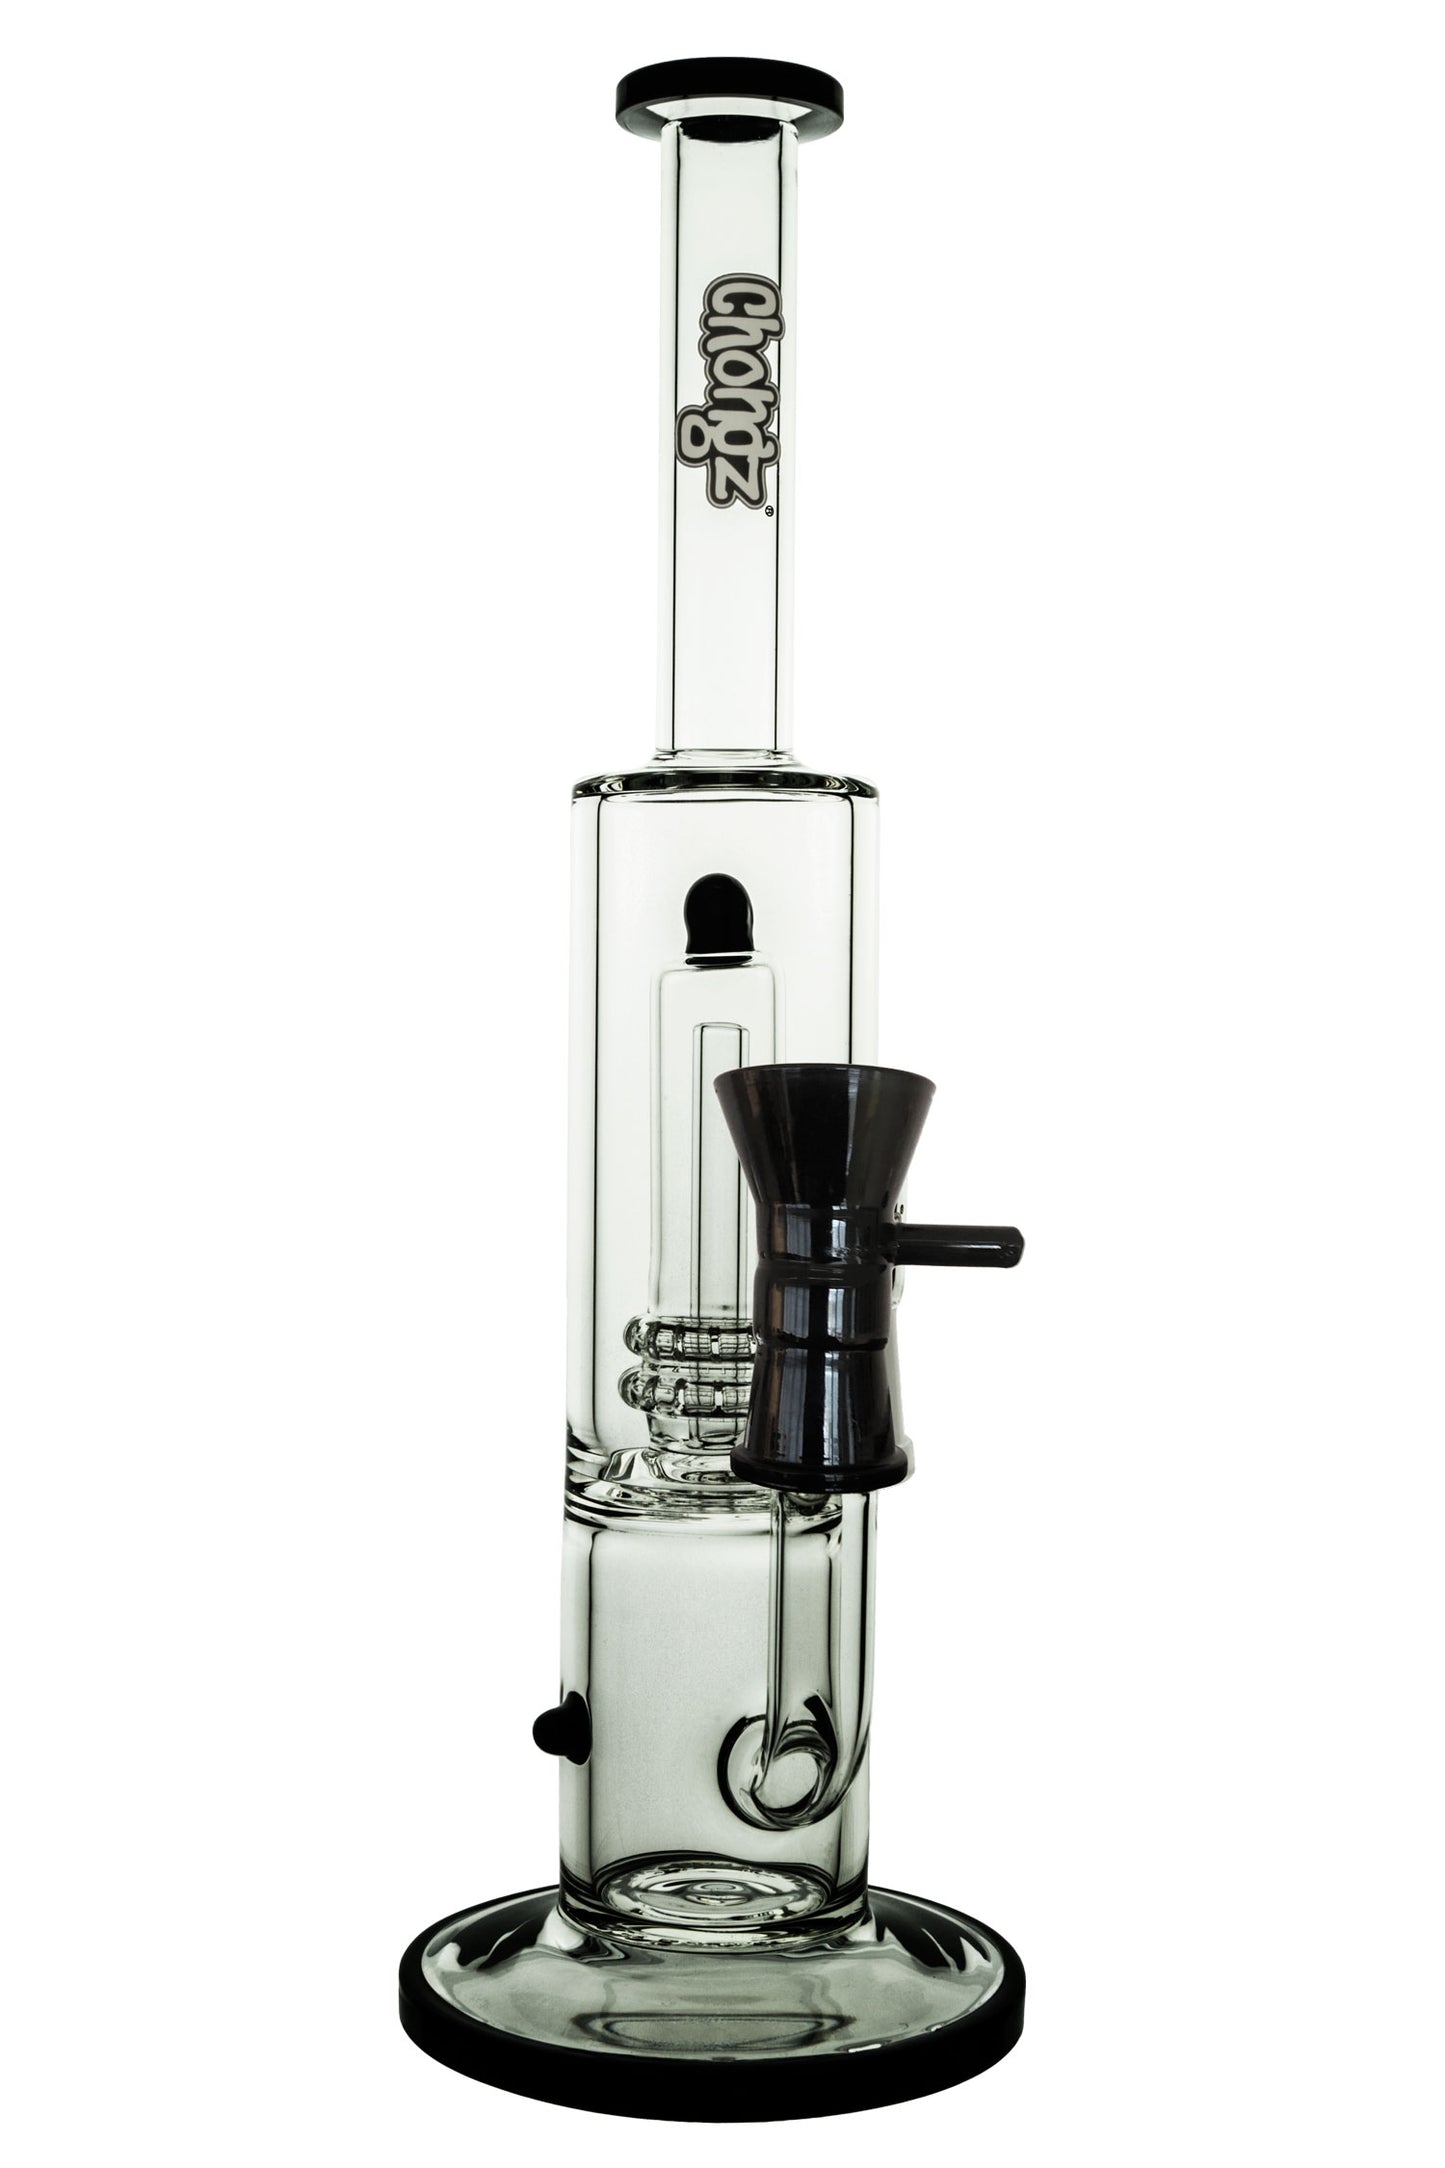 Glass Chongz "Dig" 30cm 2 system Waterpipe with blk accents